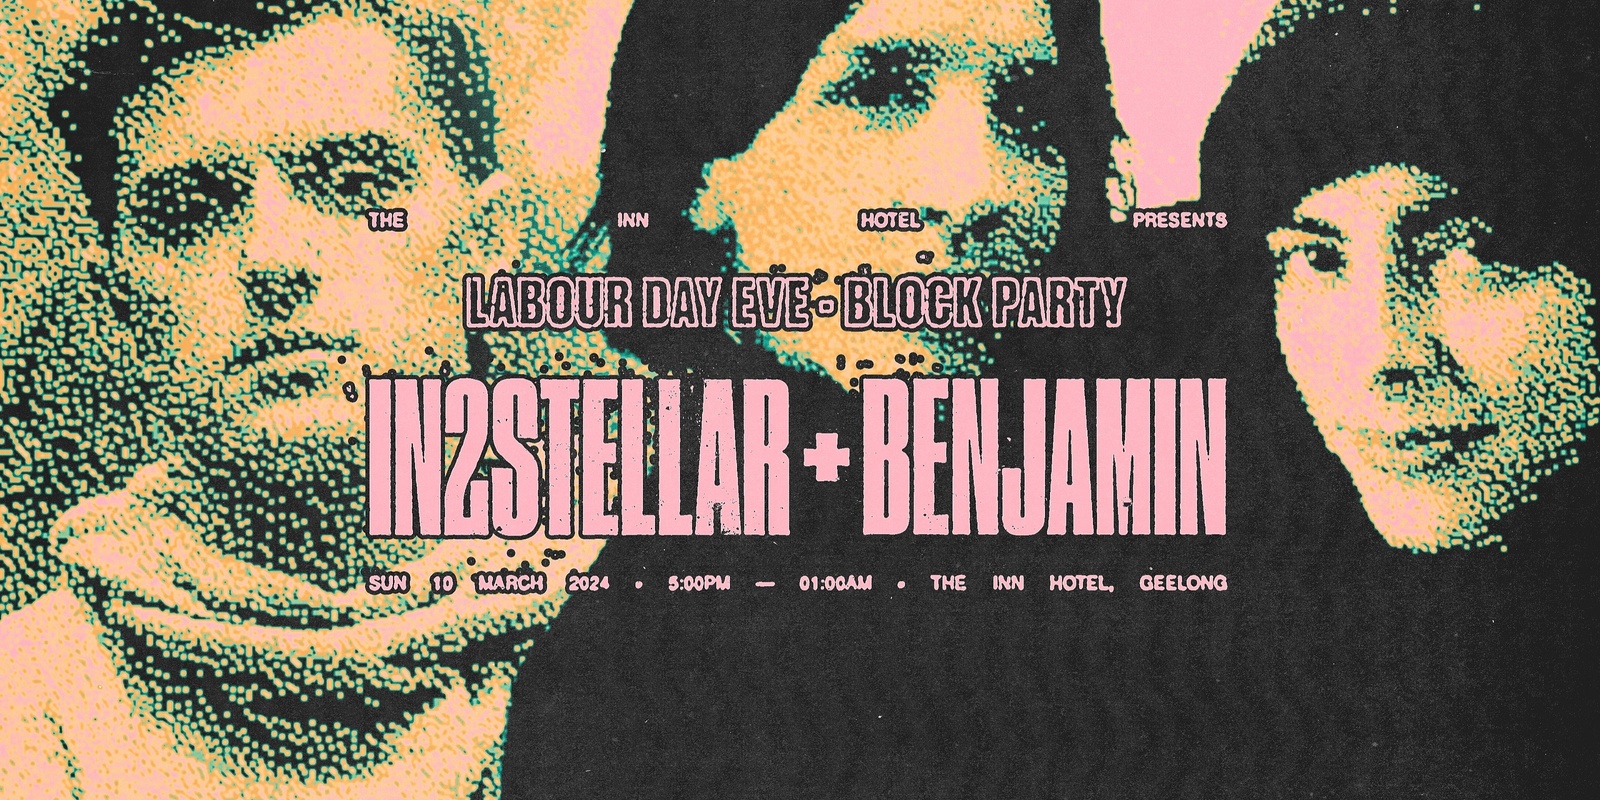 Banner image for "Labour Day Eve" Block Party ▬ IN2STELLAR & Benjamin